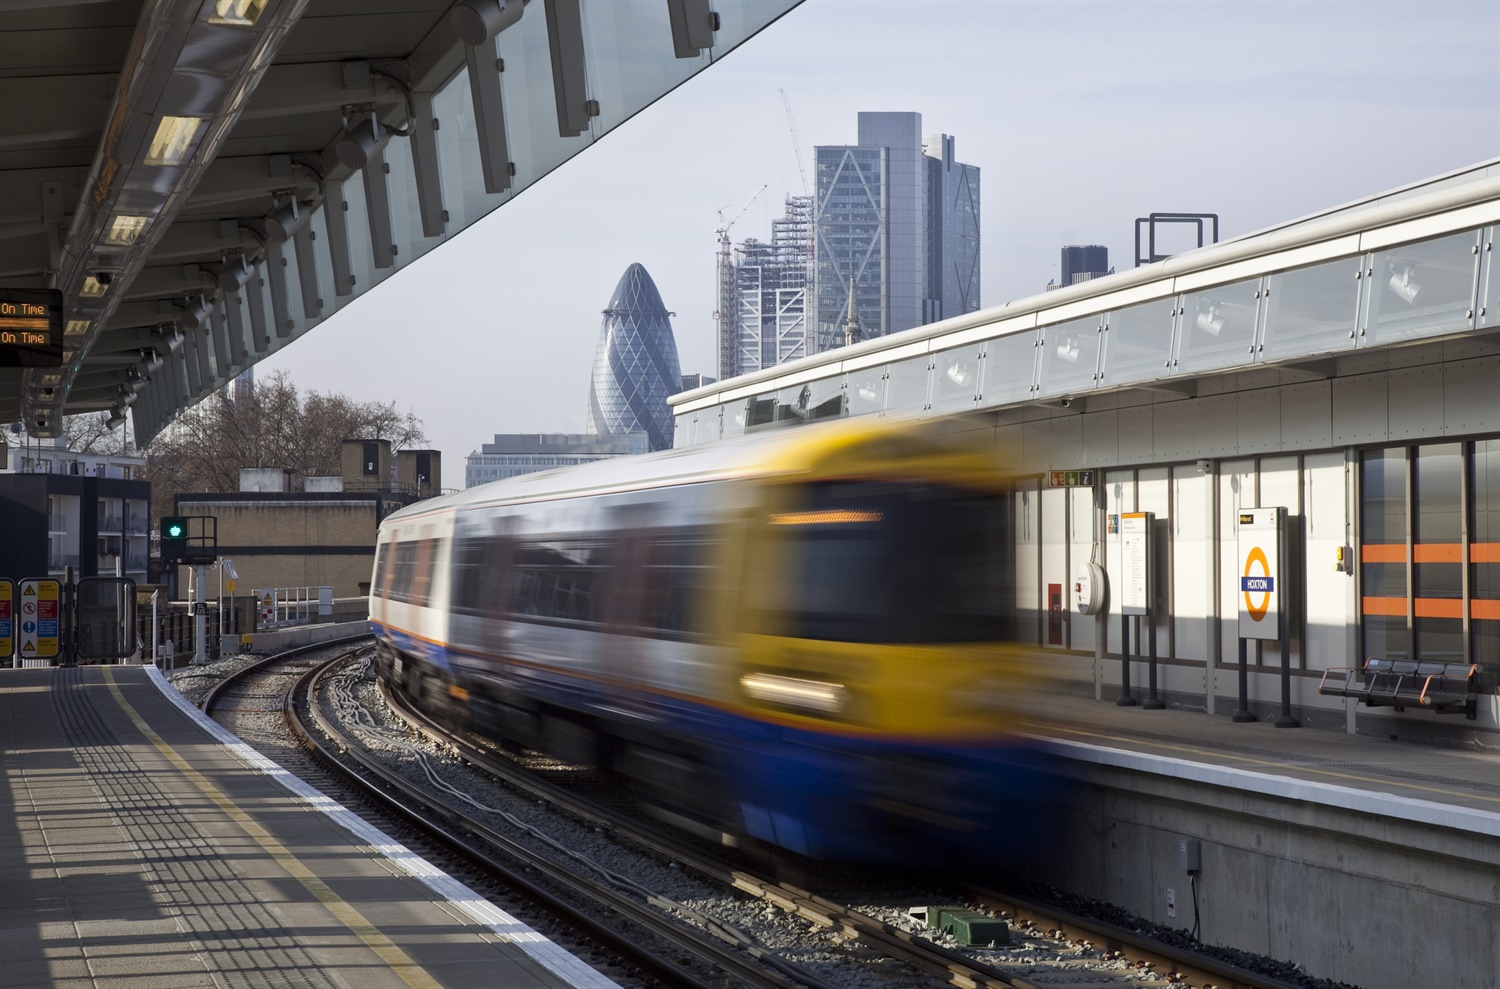 TfL takeover of London rail could be ‘Crossrail 3’ – Lord Adonis